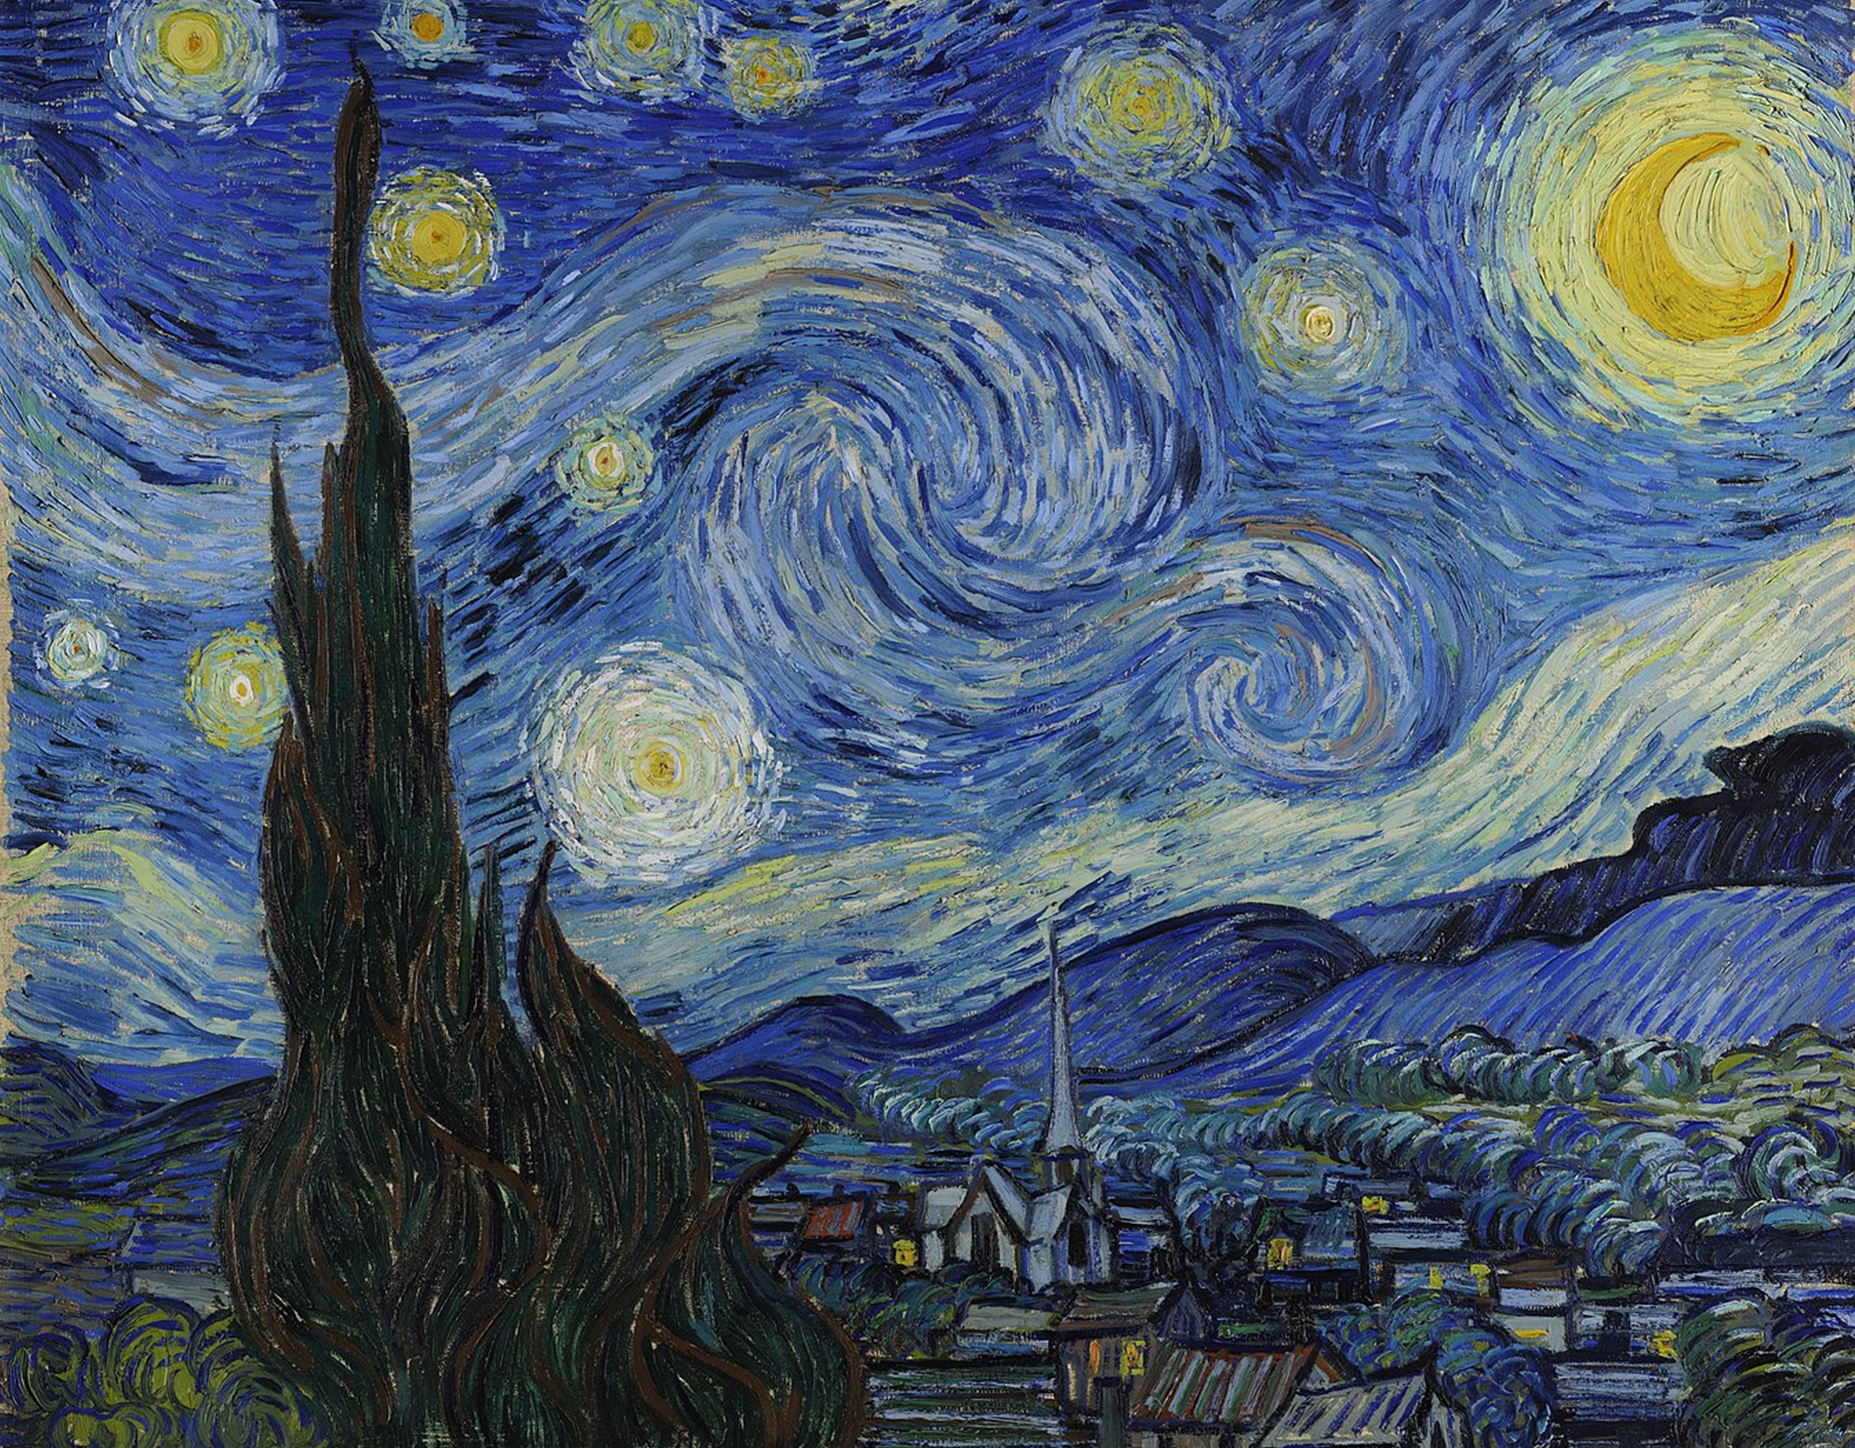 Van Gogh, Whistler, and More: Lunar Art Through the Ages